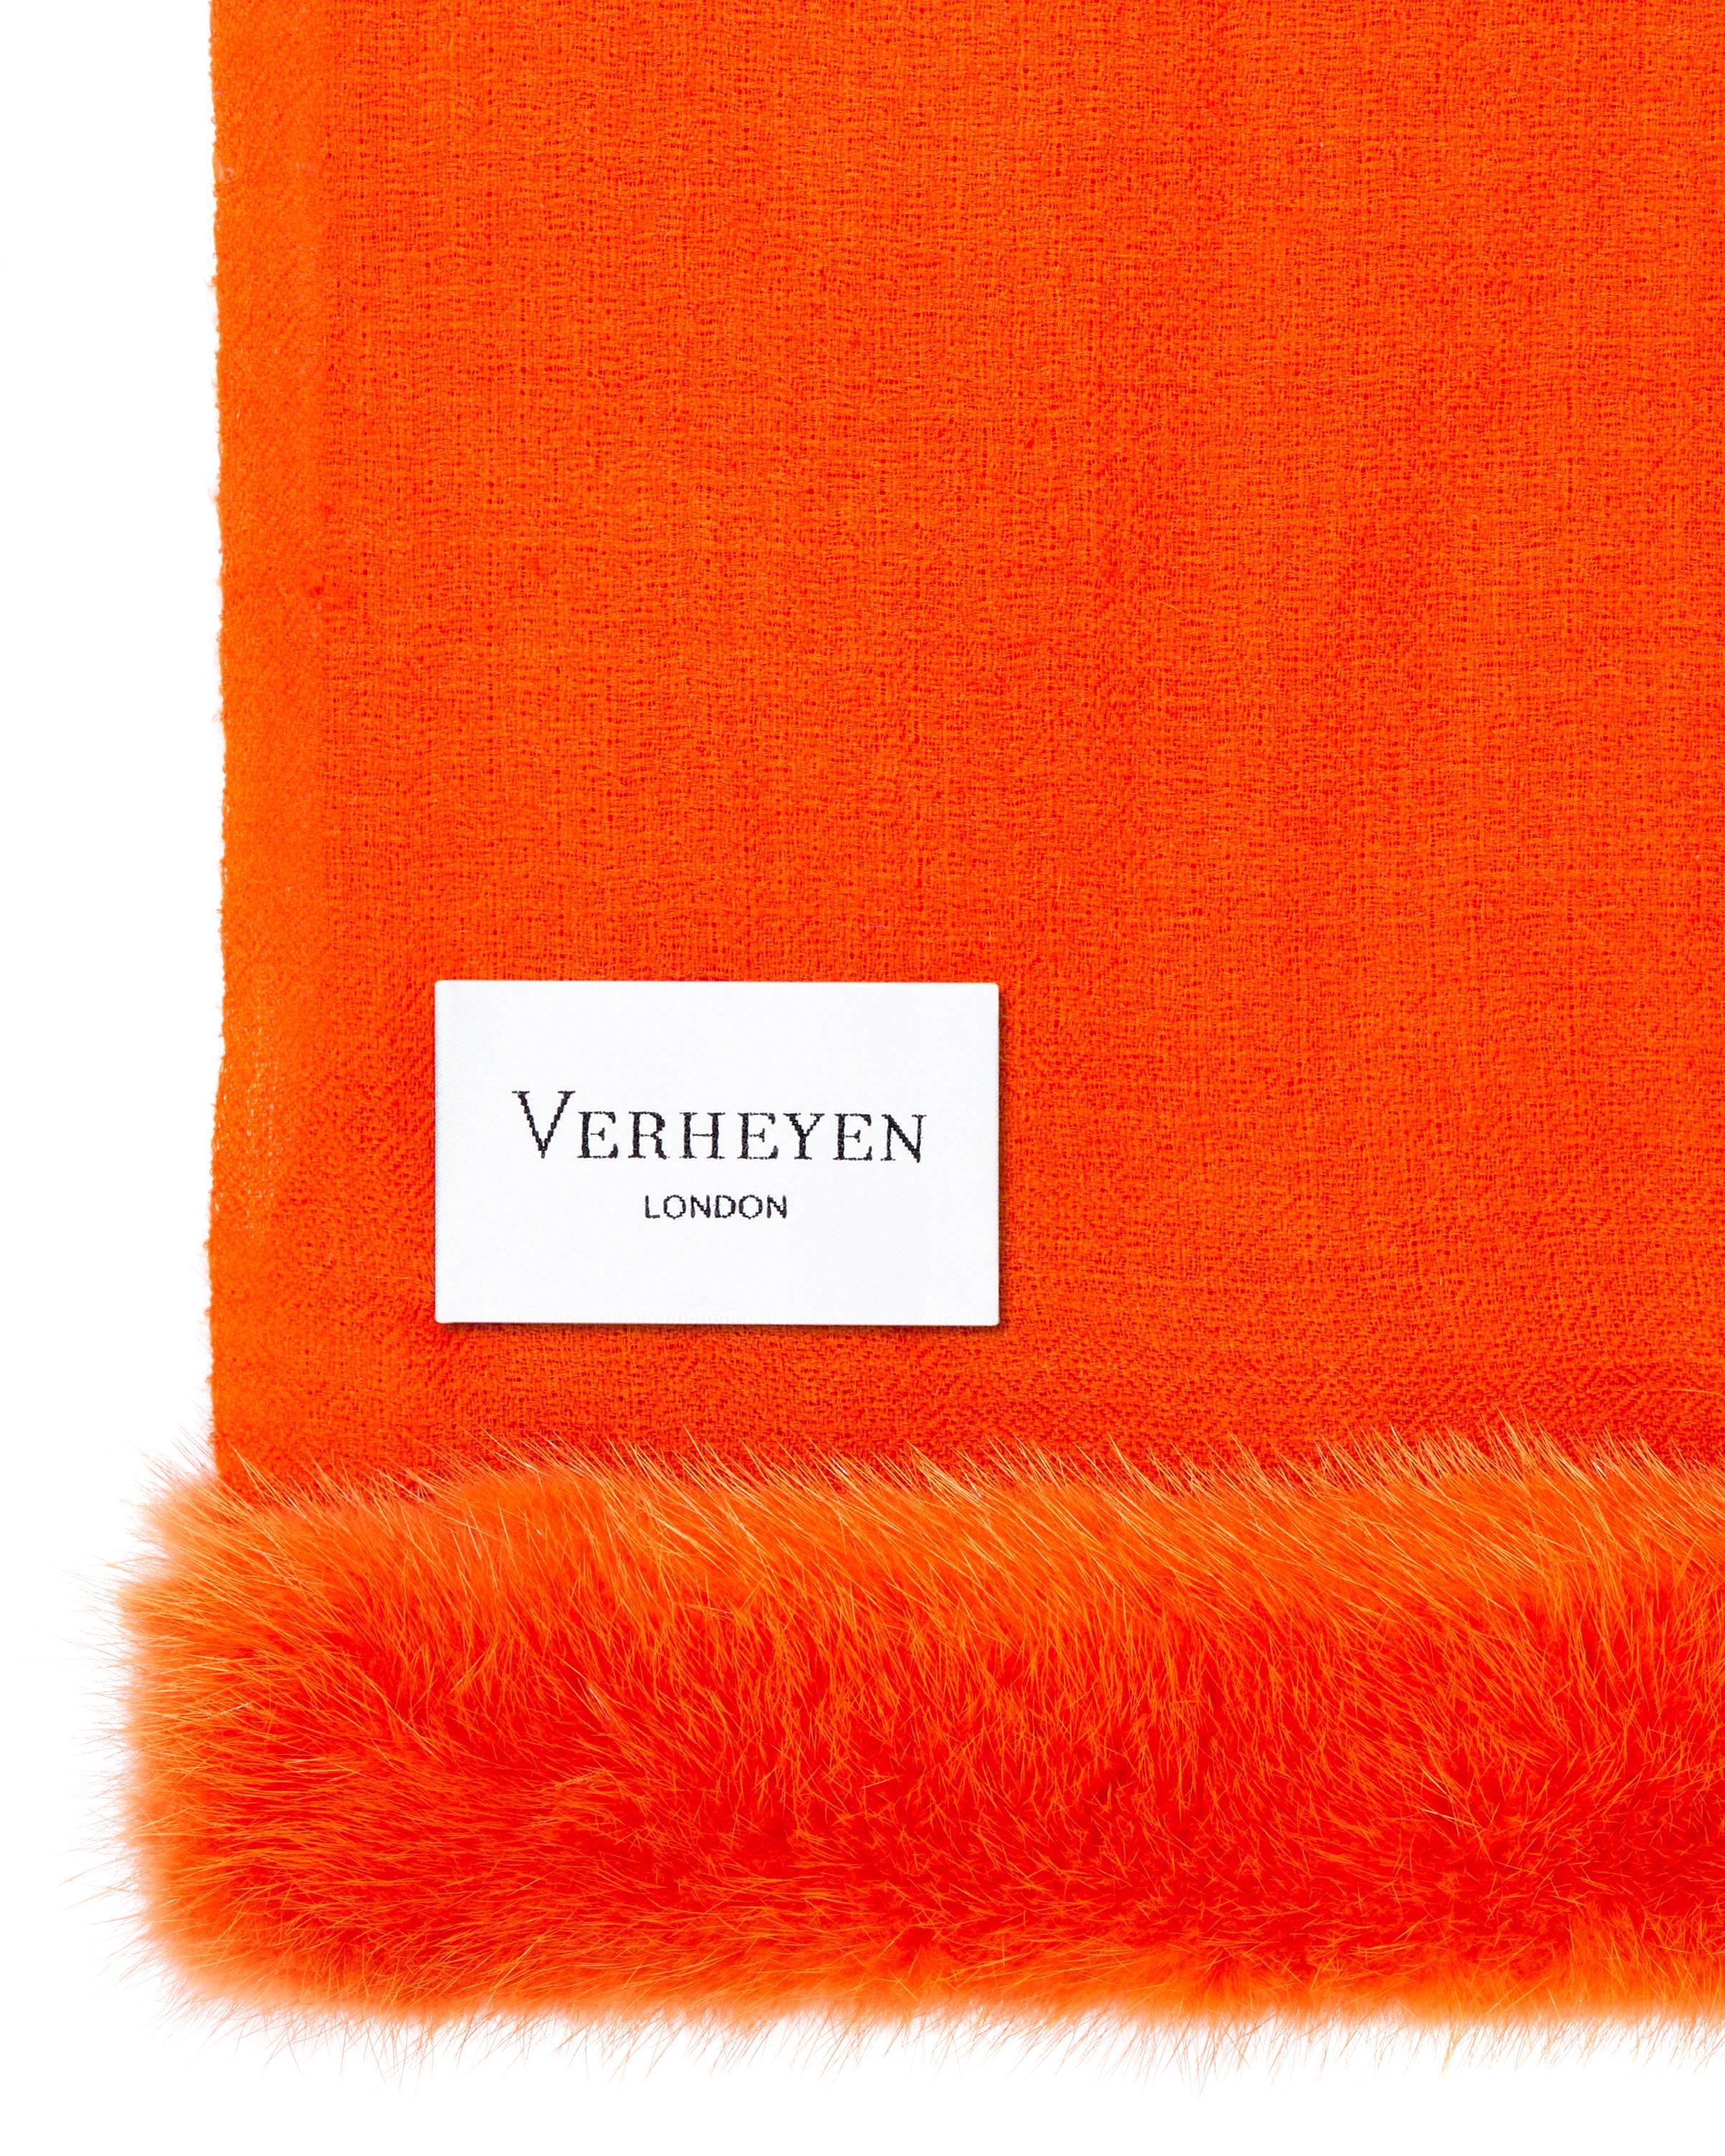 Verheyen London Handwoven Mink Fur Trimmed Orange Cashmere Shawl 

Verheyen London’s shawl is spun from the finest lightweight handwoven cashmere from Kashmir and finished with the most exquisite dyed mink. Its warmth envelopes you with luxury,